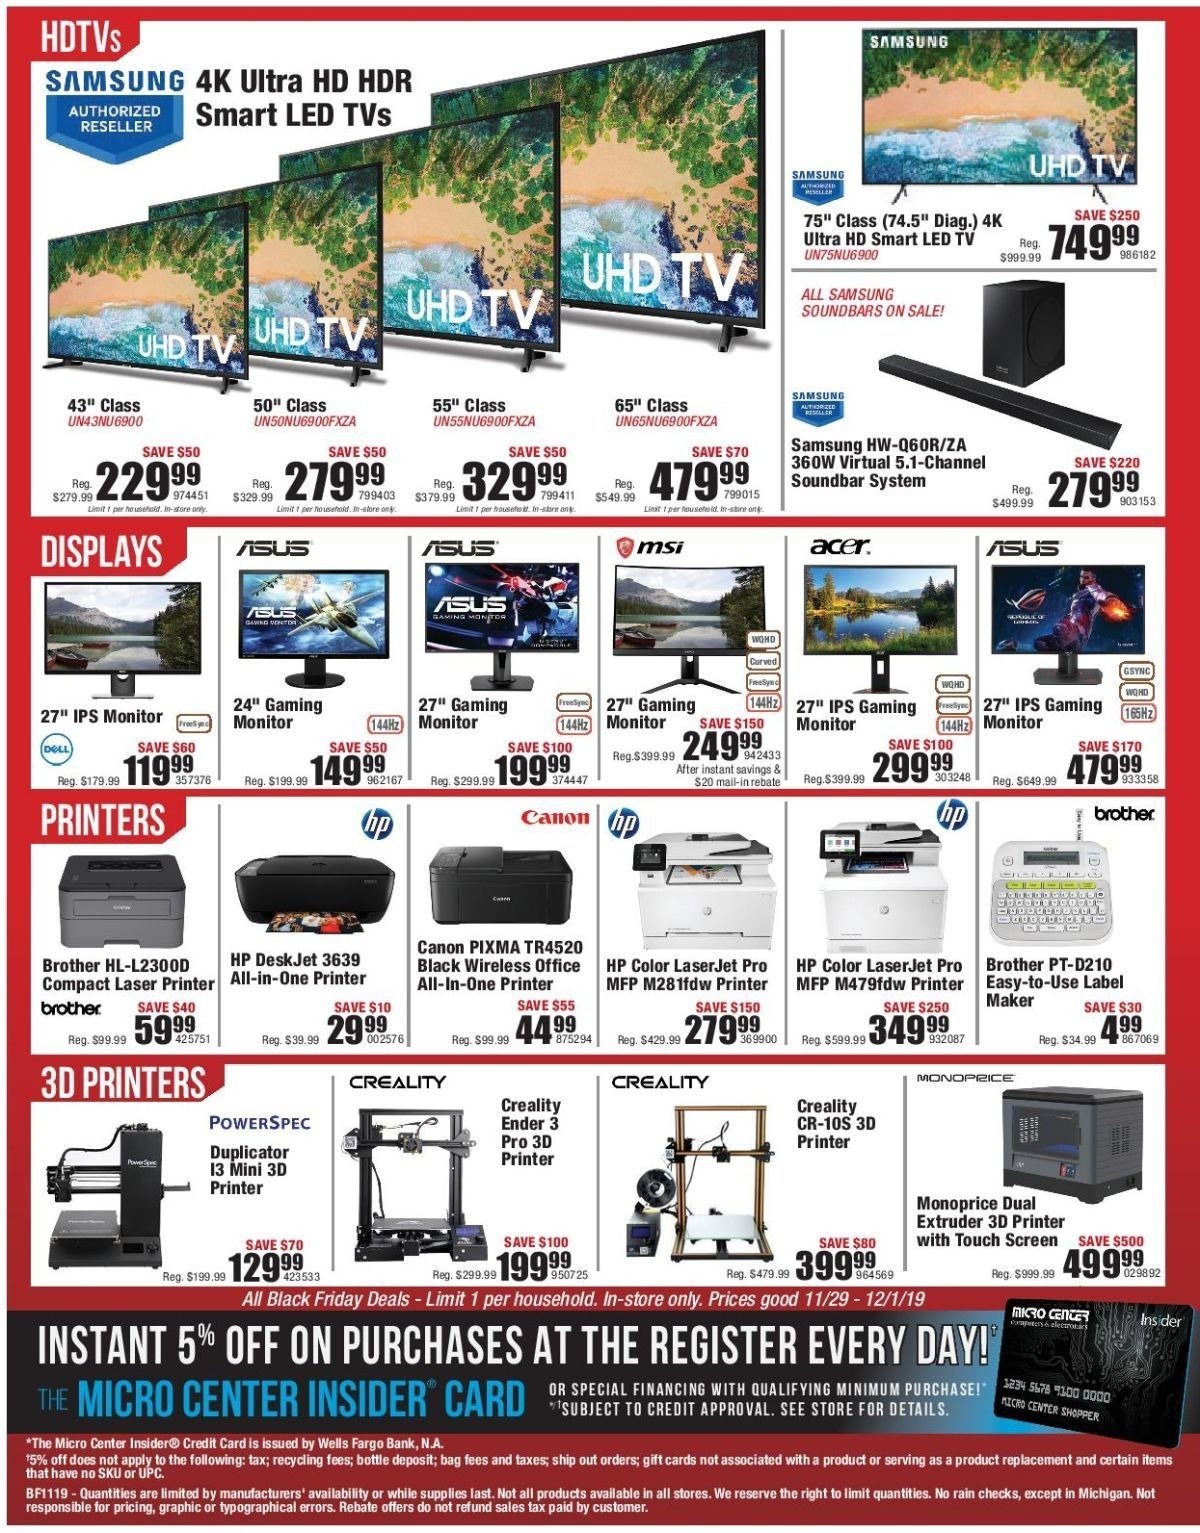 Micro Center 2019 Black Friday Ad | Frugal Buzz